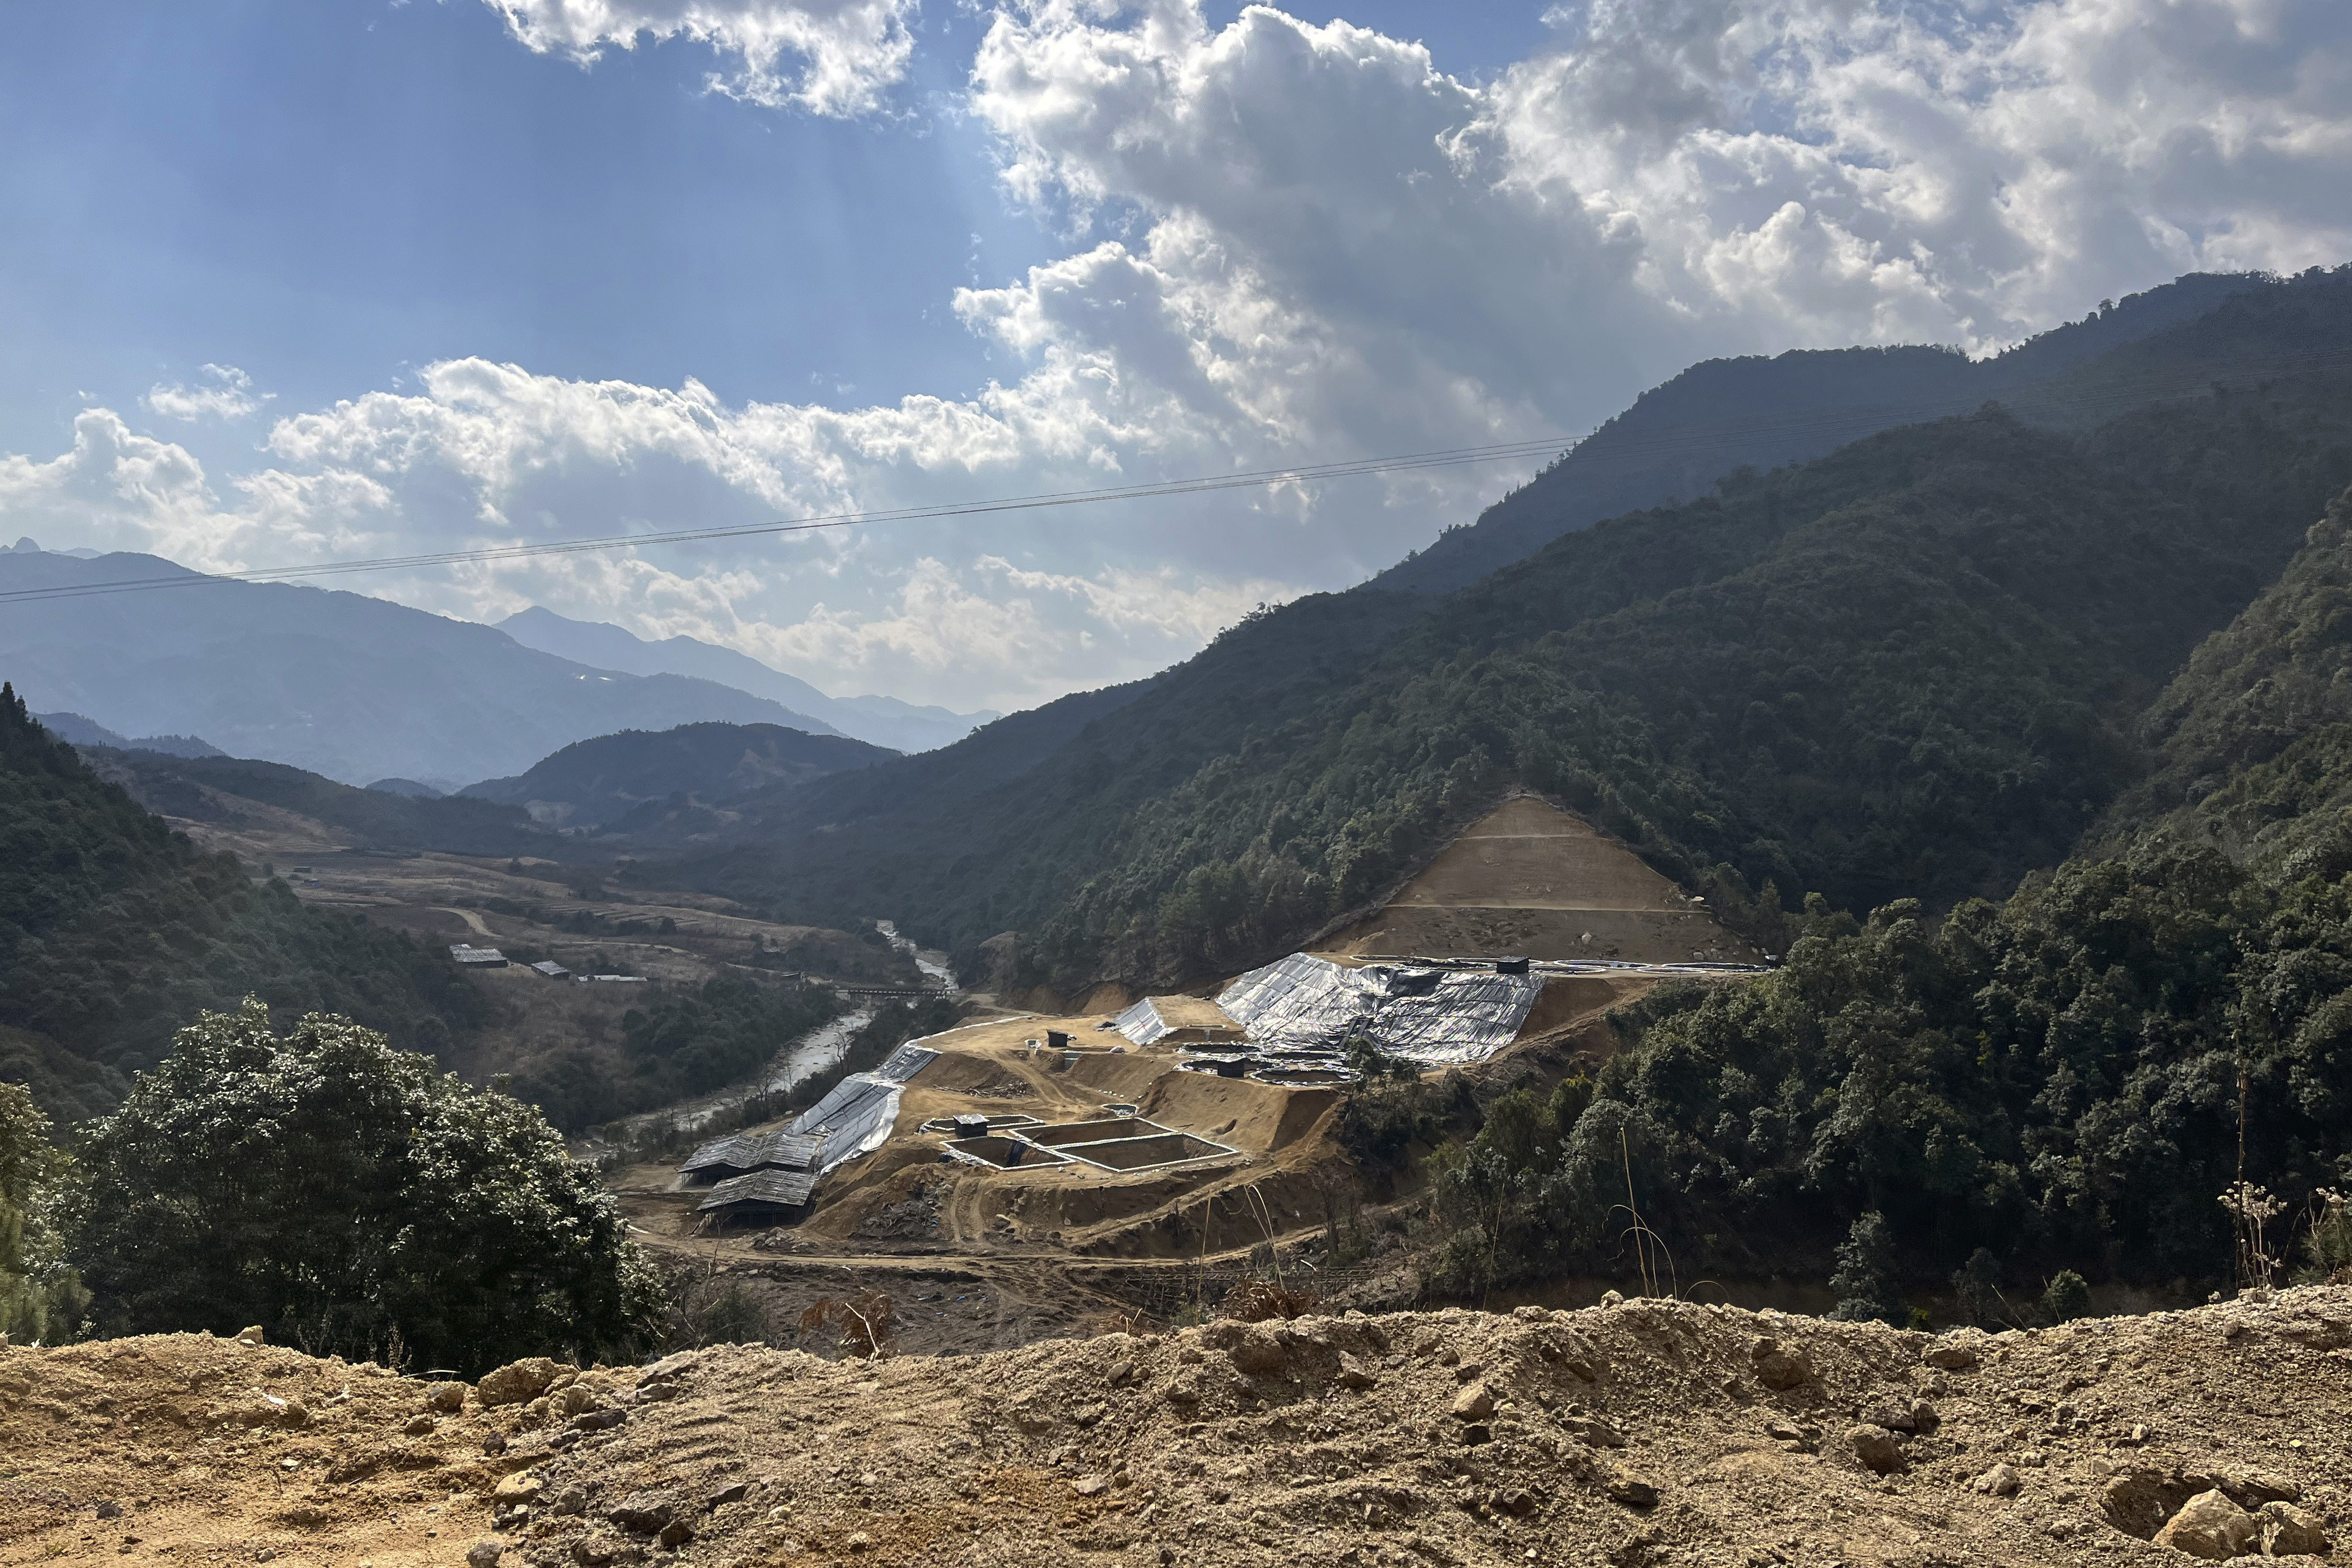 A rare earth mine is seen dug into the side of a mountain in Pangwa, Myanmar’s Kachin state, close to the Chinese border. Photo: Global Witness via AP